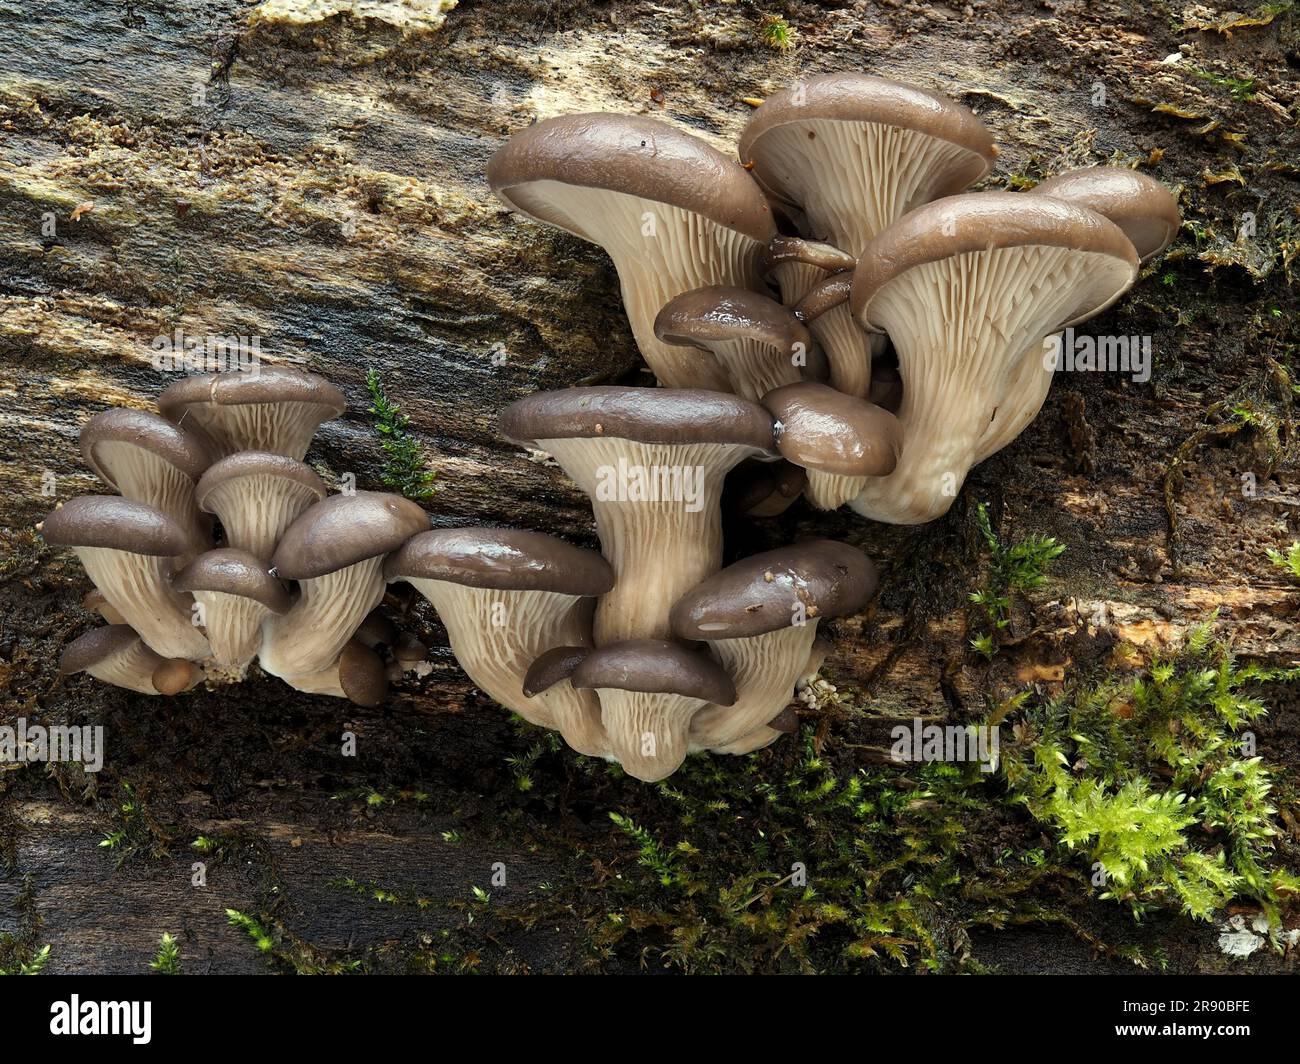 Oyster mushroom straw Cut Out Stock Images & Pictures - Alamy